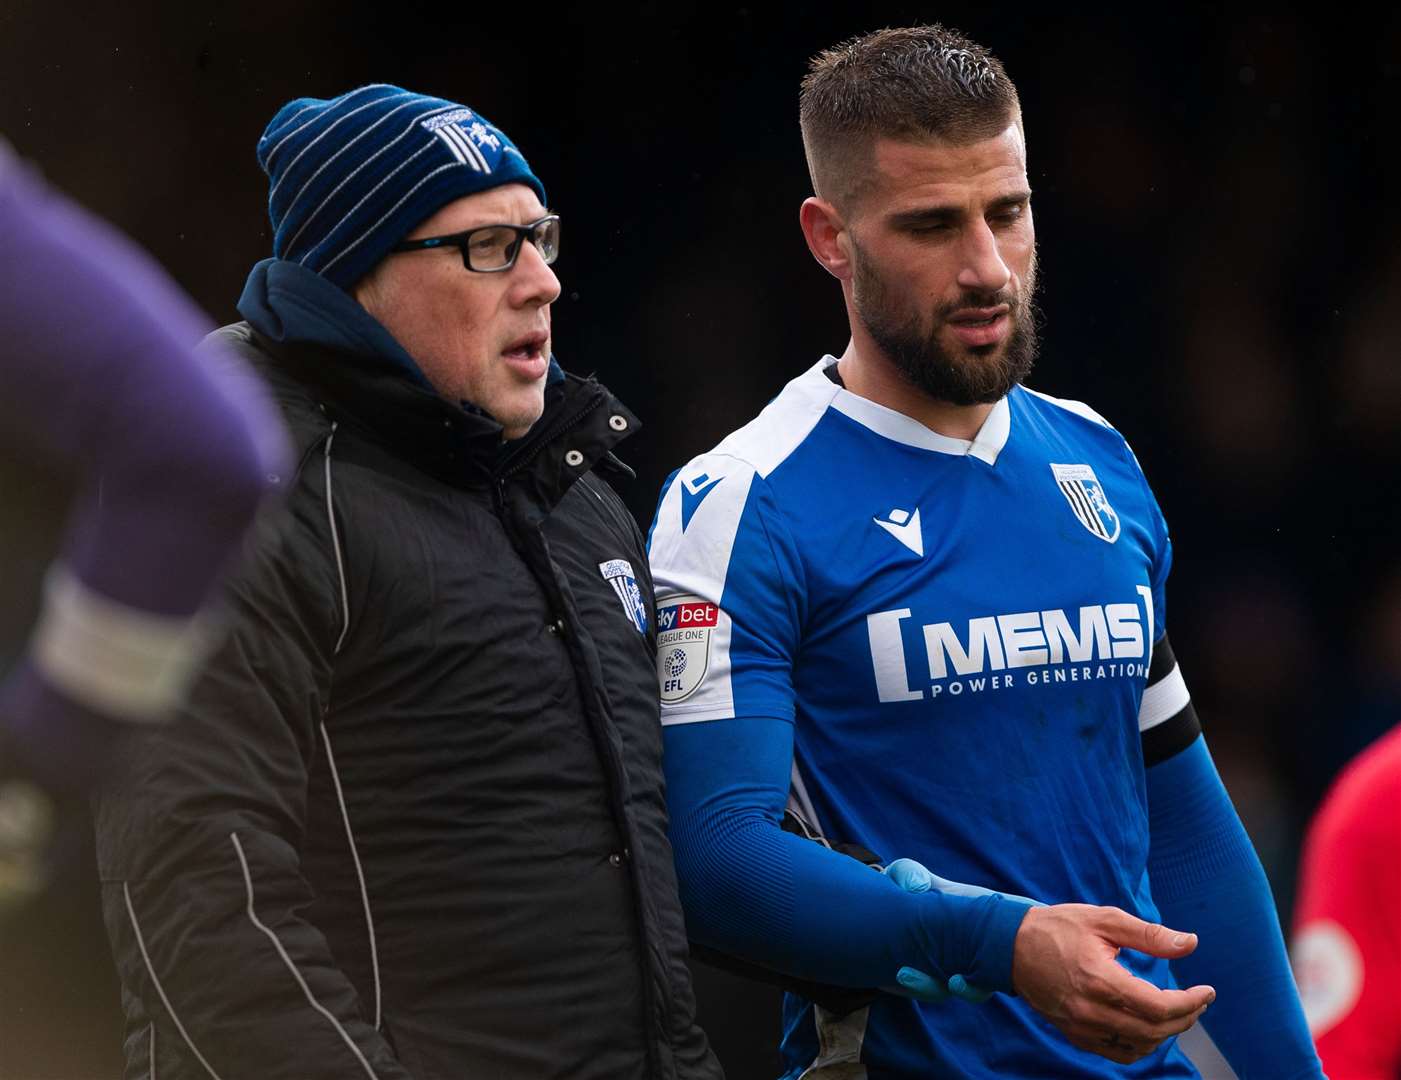 Defender Max Ehmer suffered with shoulder injuries during his time with Gillingham